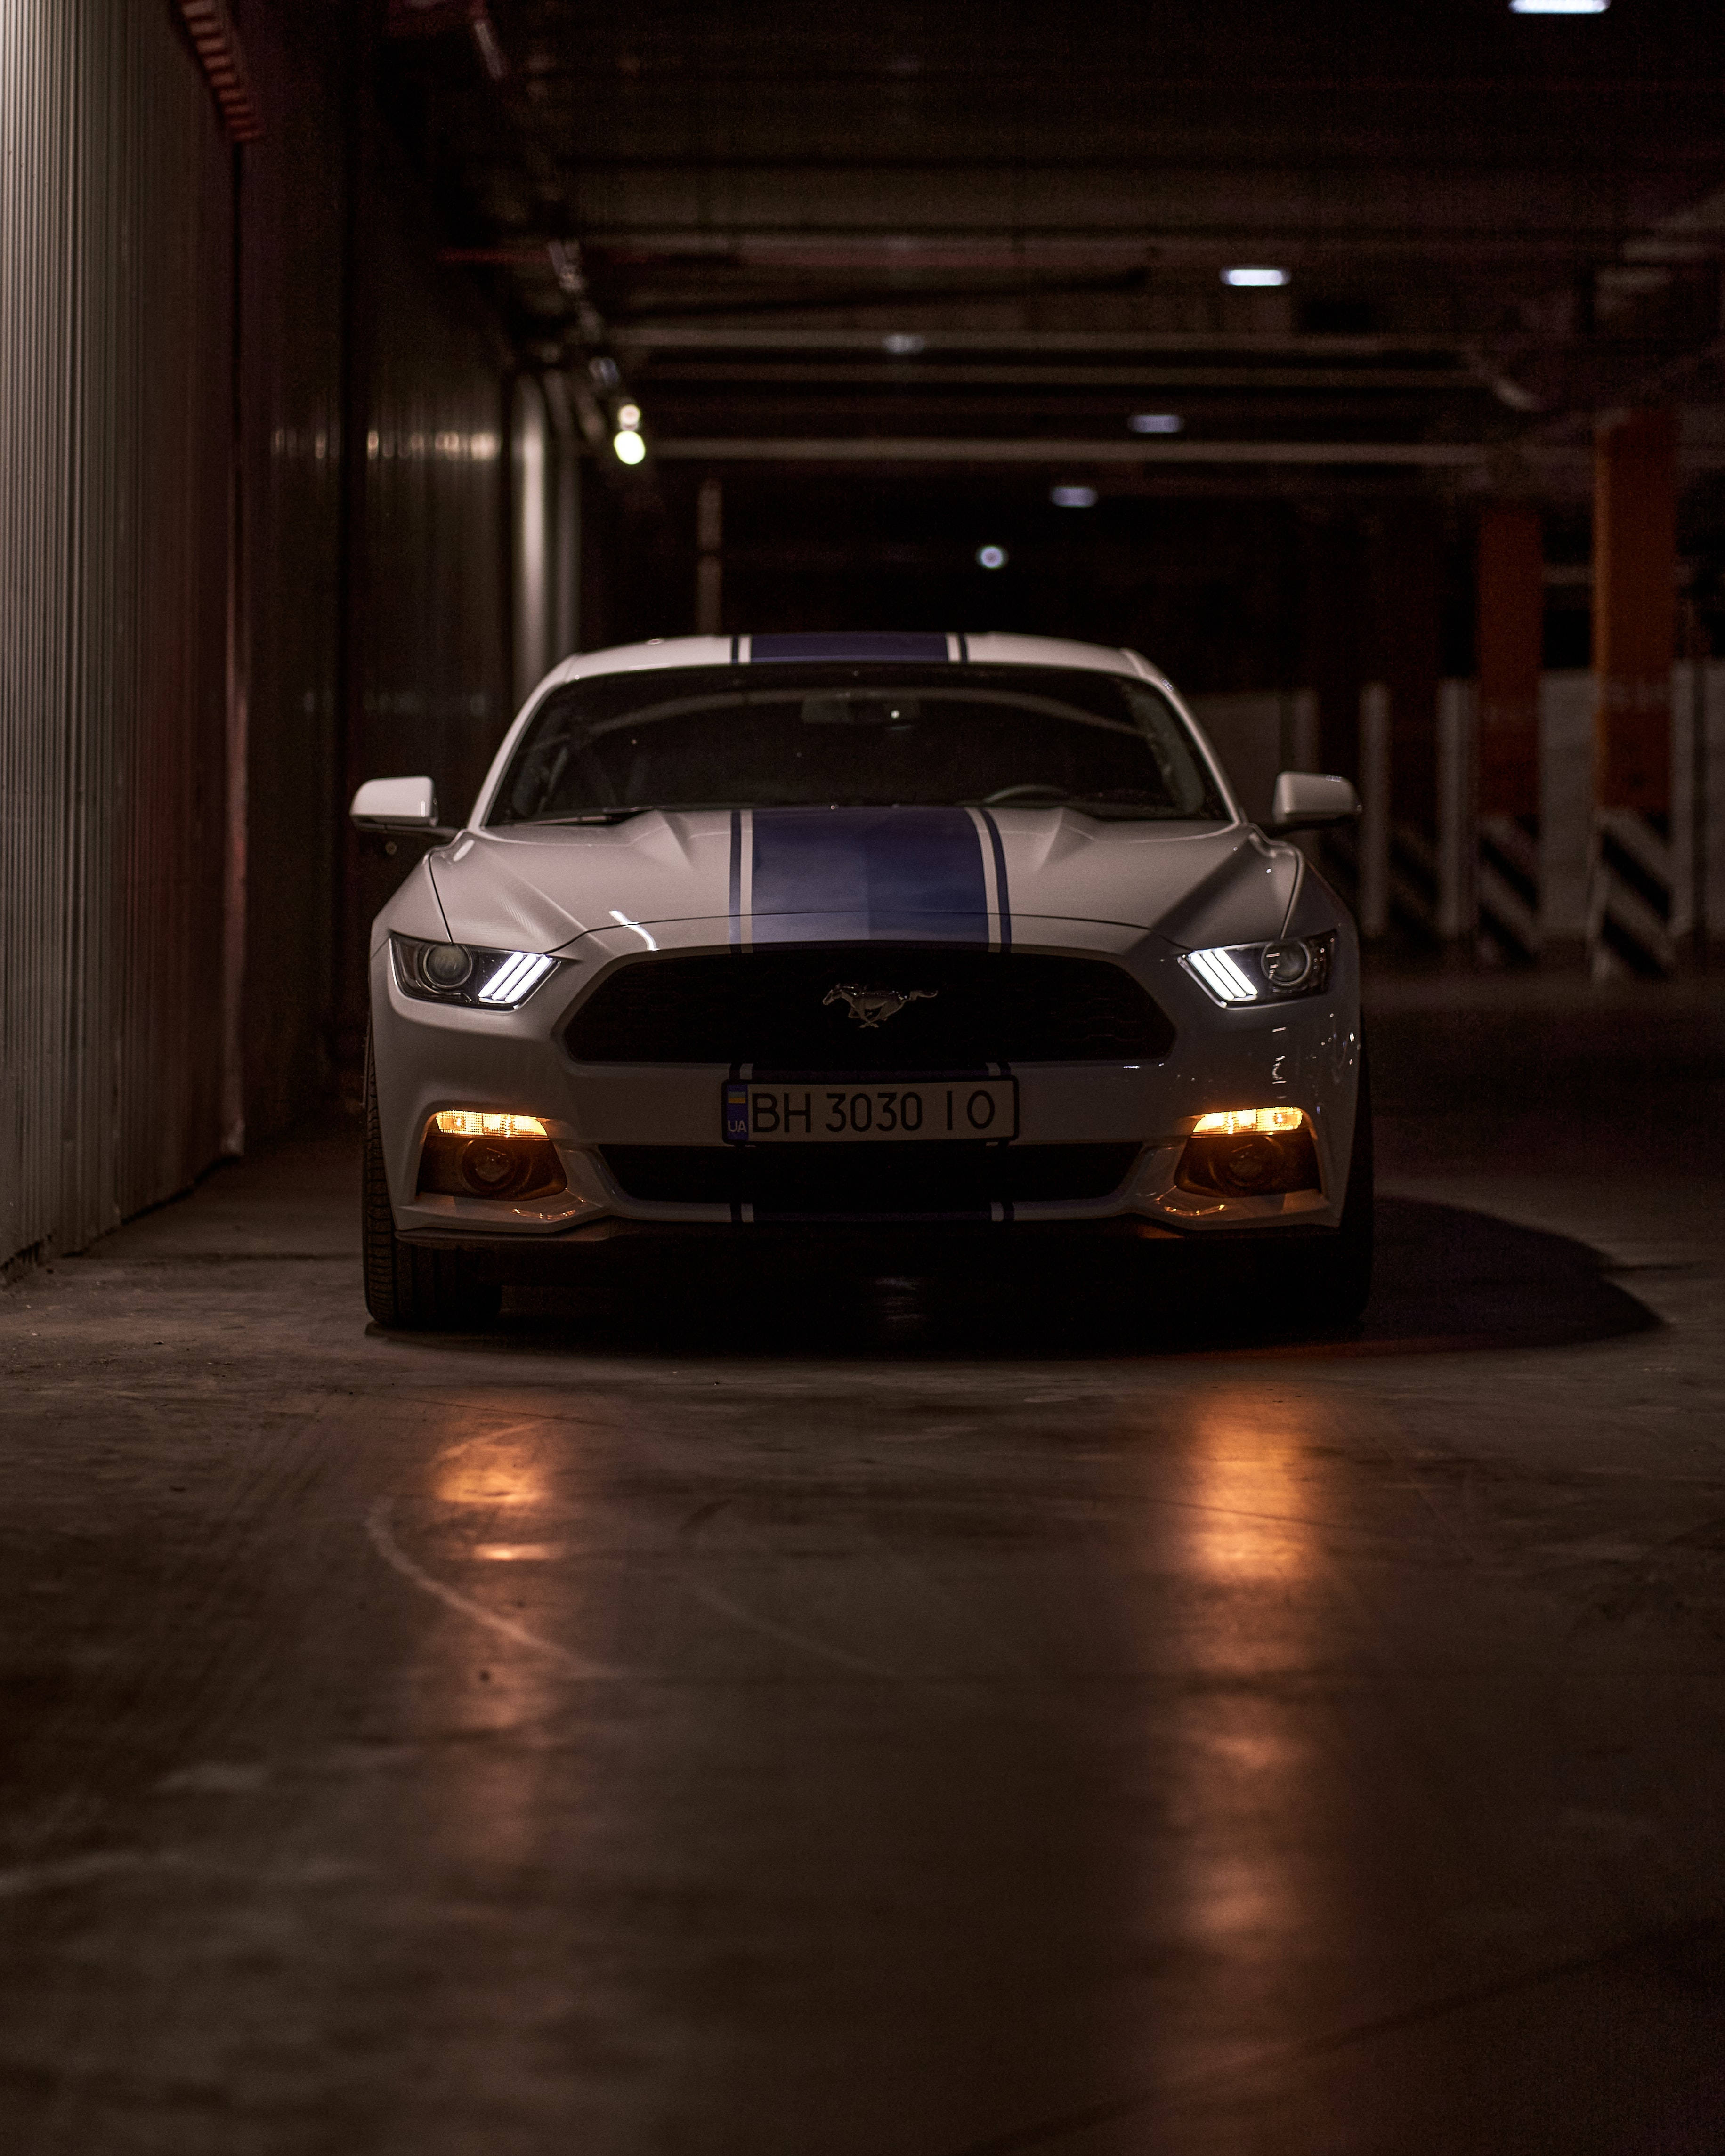 Ford Mustang Wallpapers on WallpaperDog